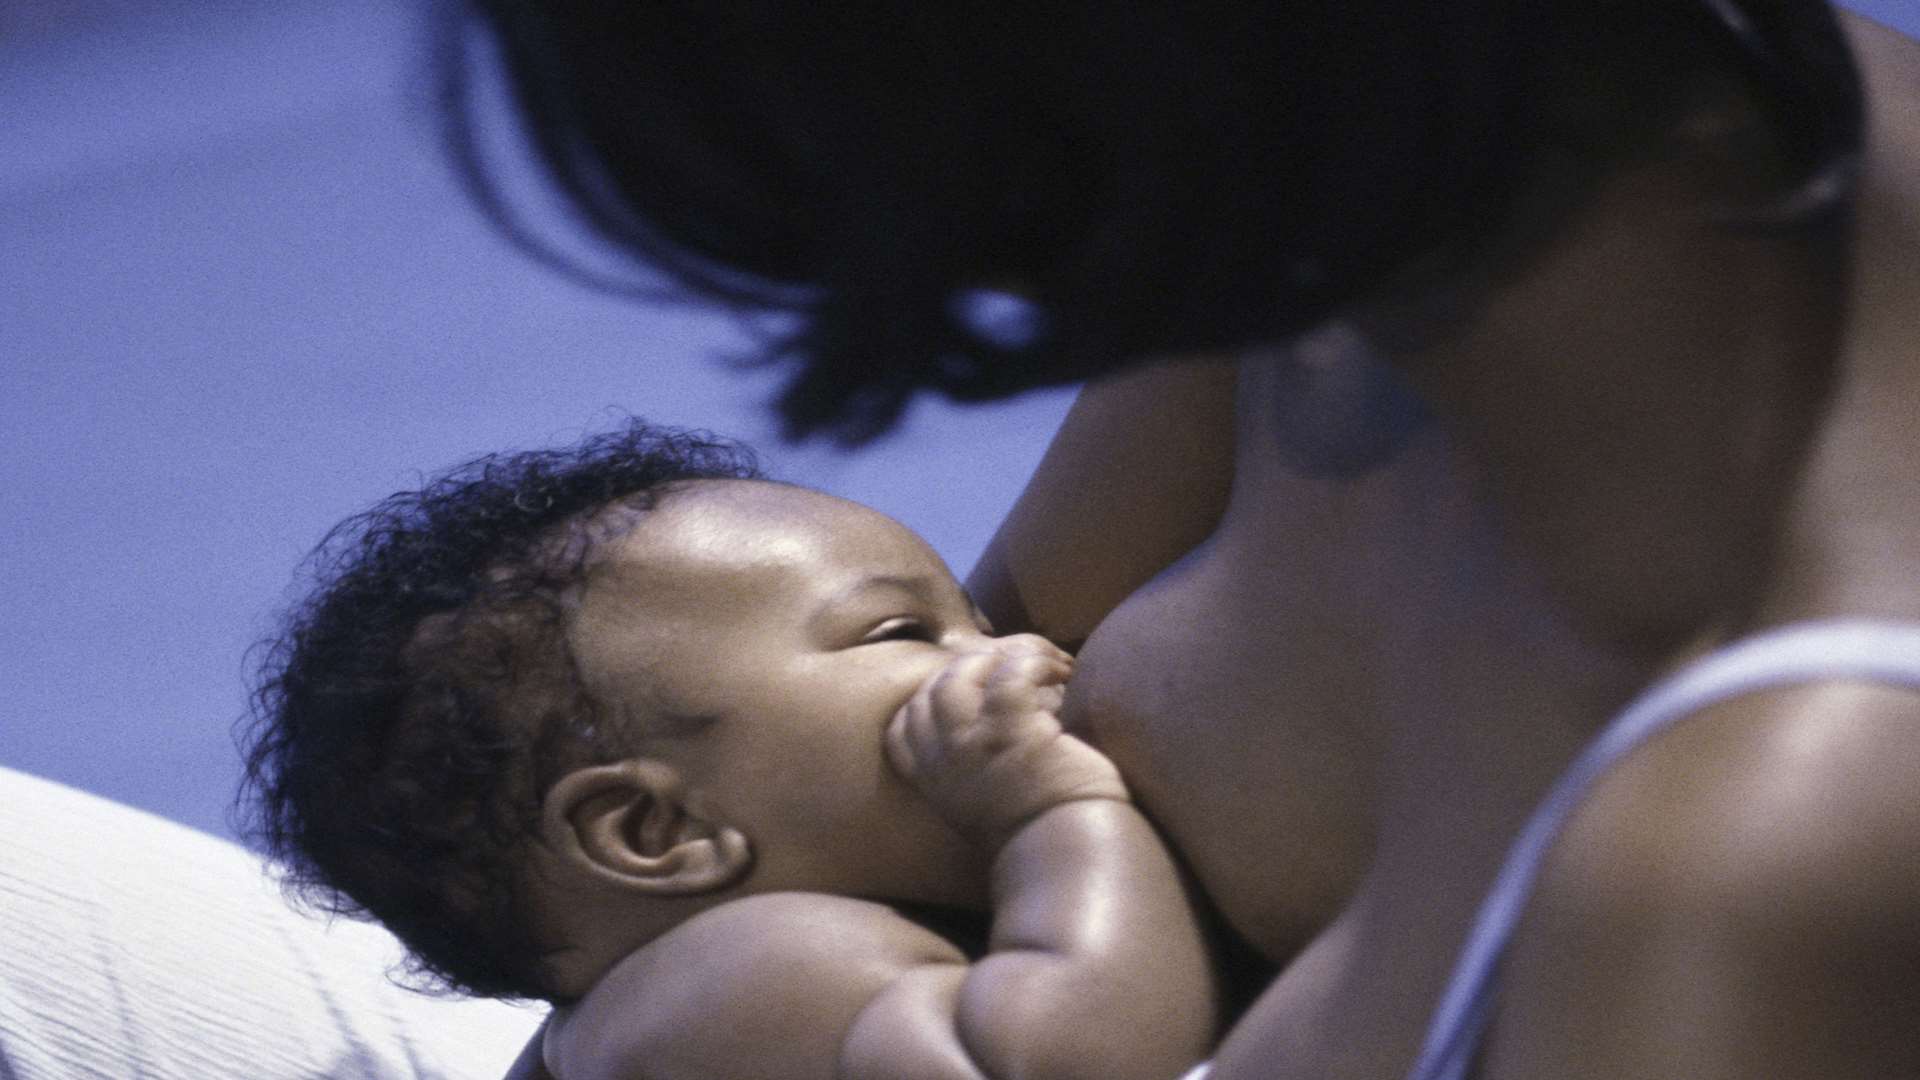 UK breastfeeding rates are among the lowest in the western world